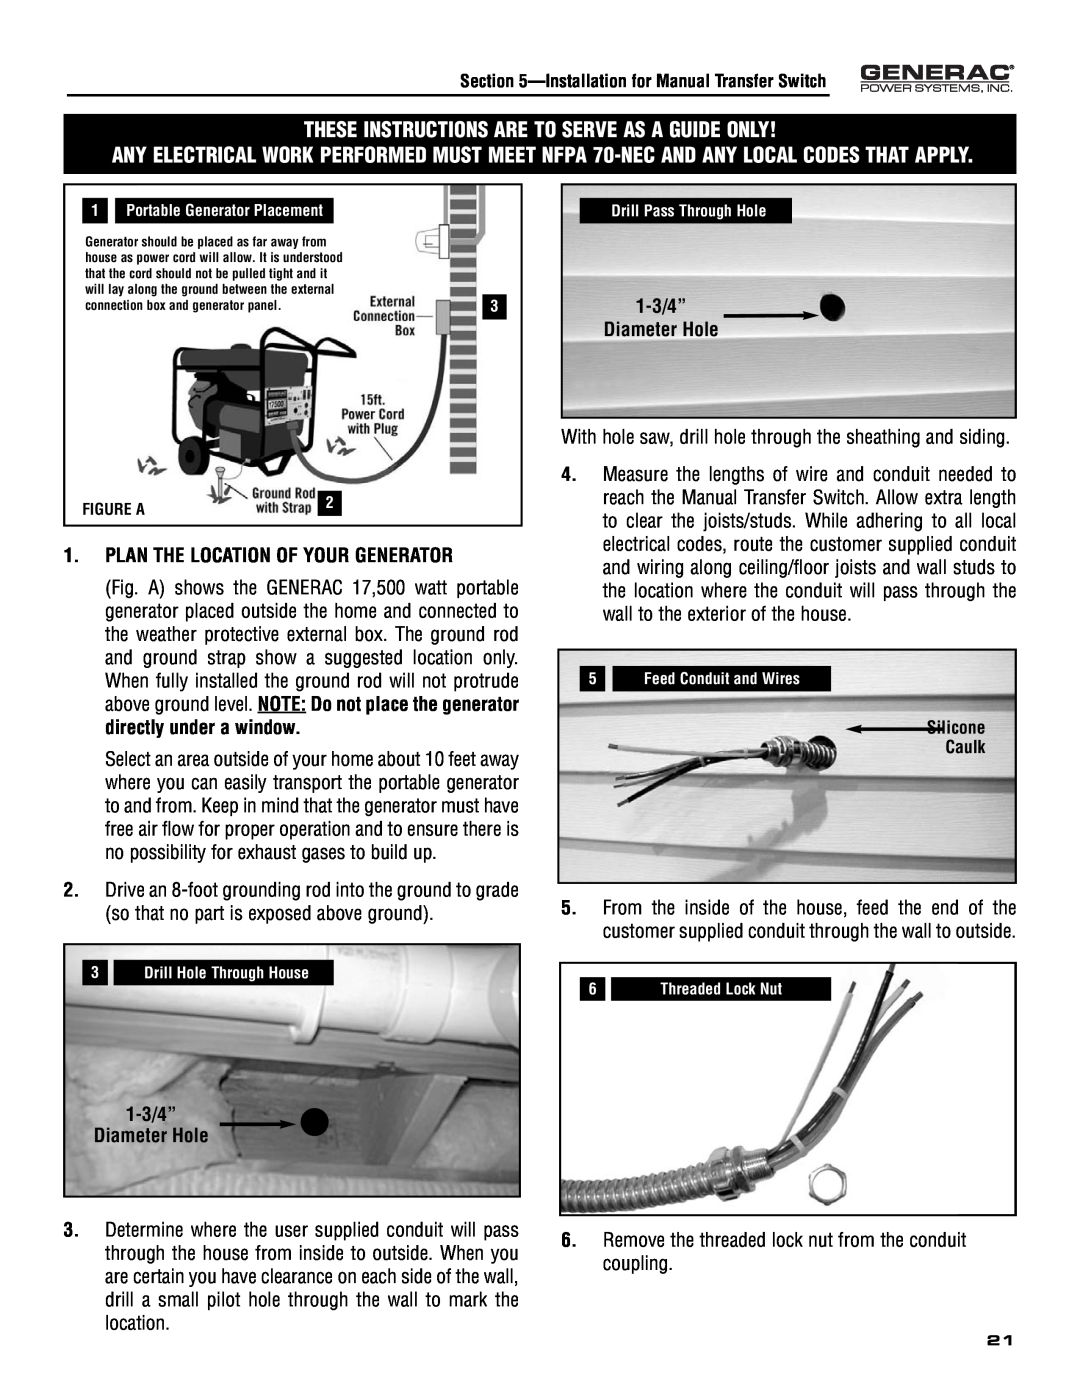 Generac 005308-0 These Instructions Are To Serve As A Guide Only, Plan The Location Of Your Generator, Silicone Caulk 